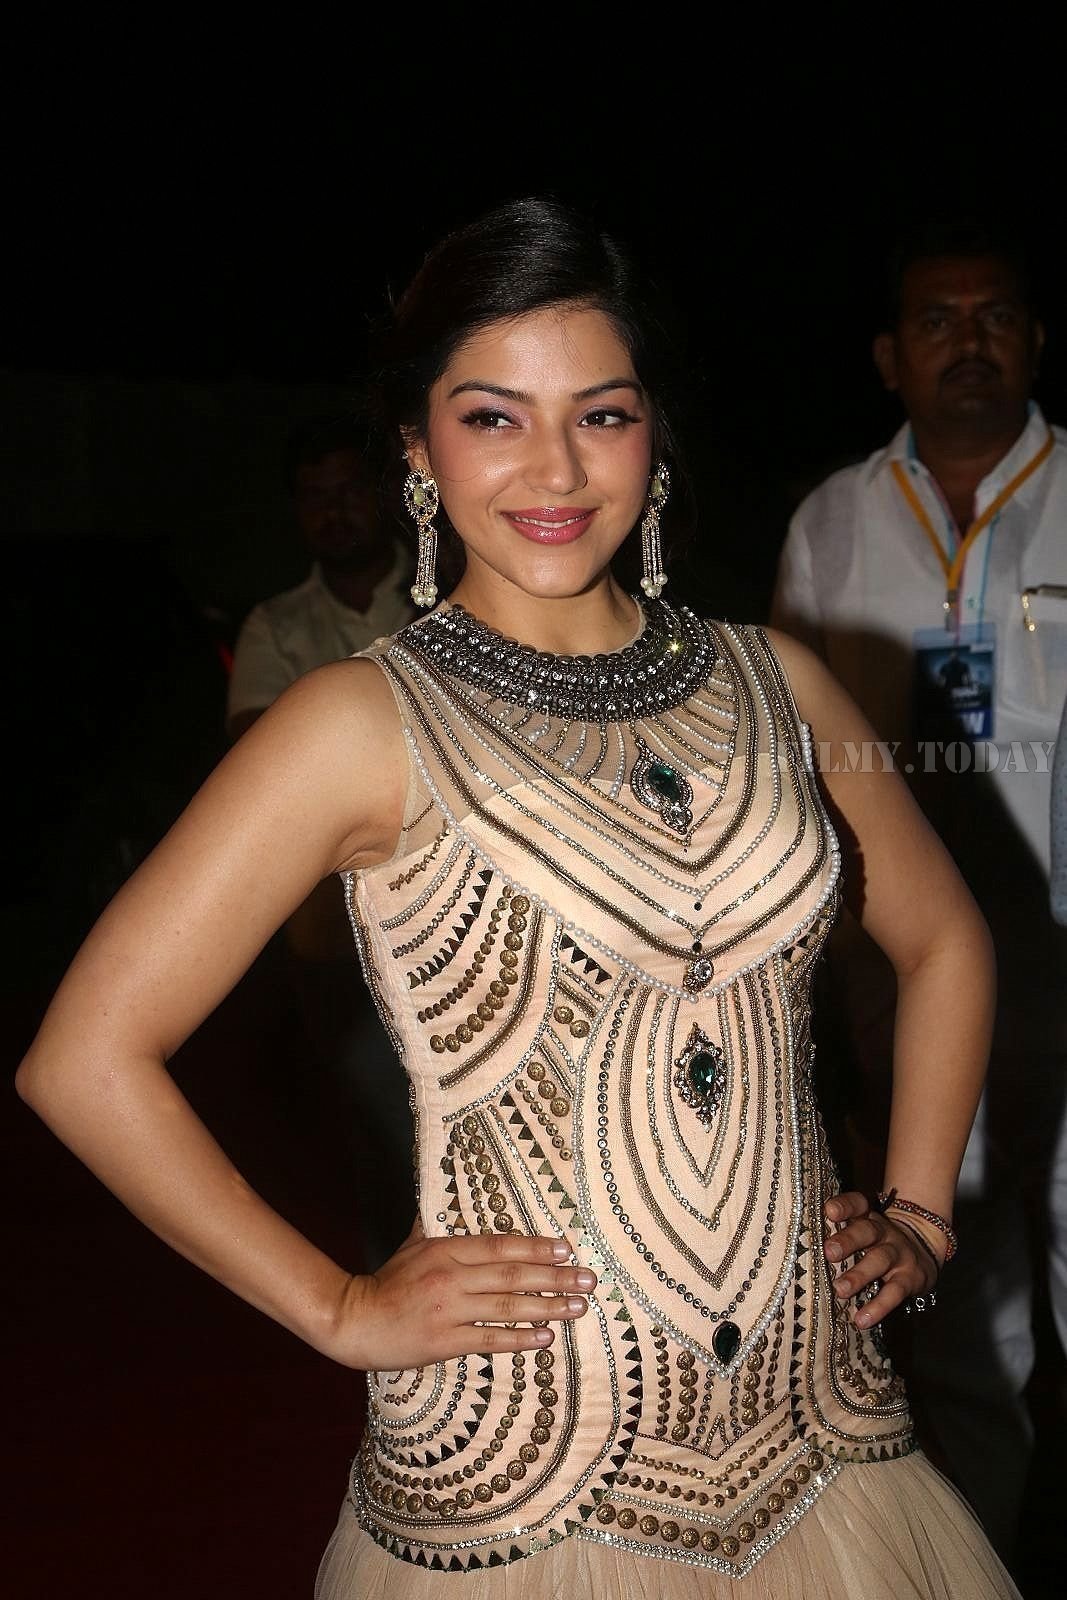 Mehreen Kaur - Photos: Jawaan Movie Audio Launch and Pre Release Function | Picture 1545981